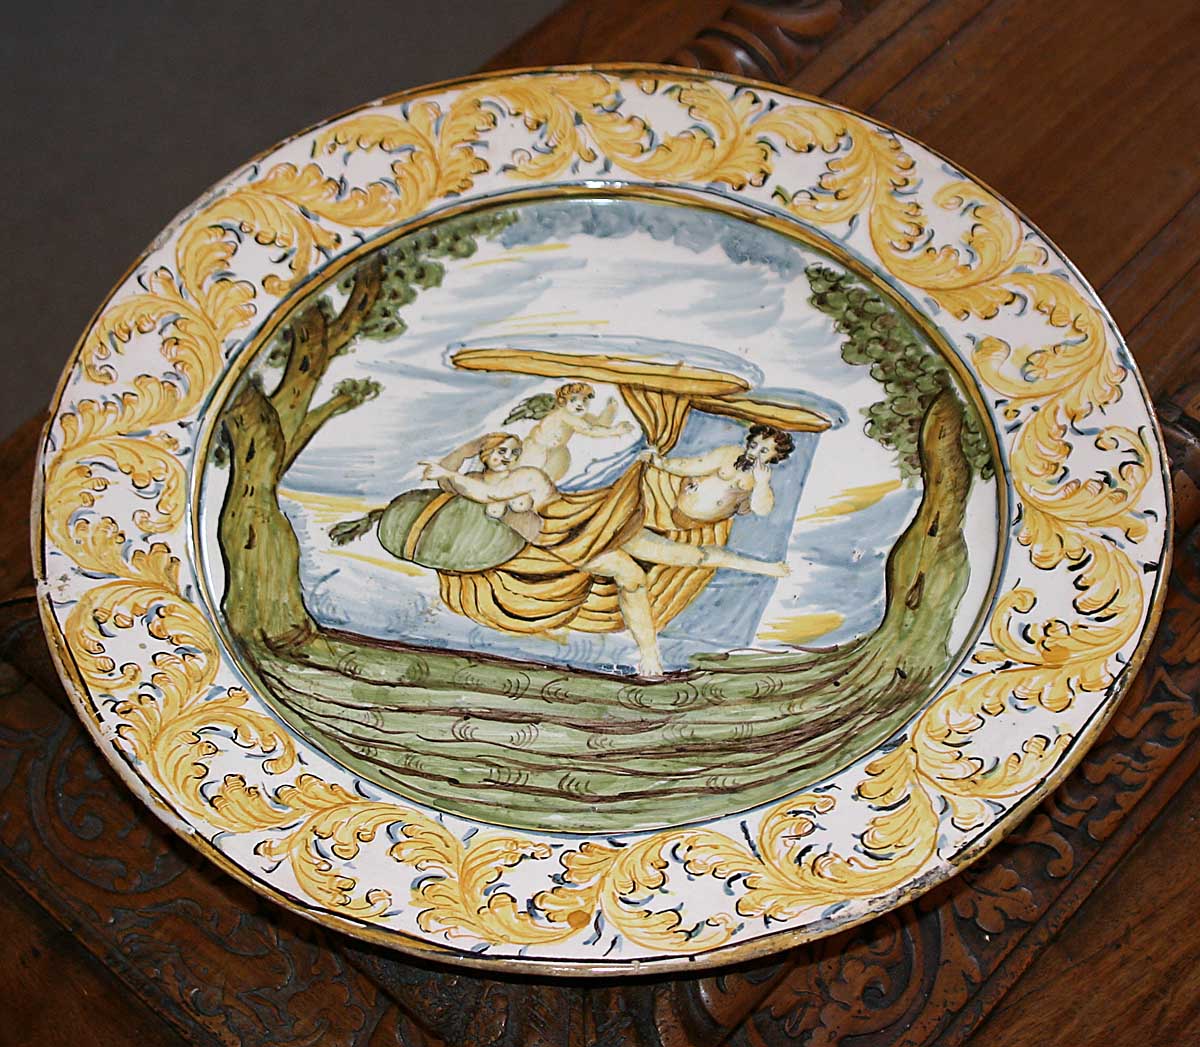 Italian Majolica charger of large dimensions